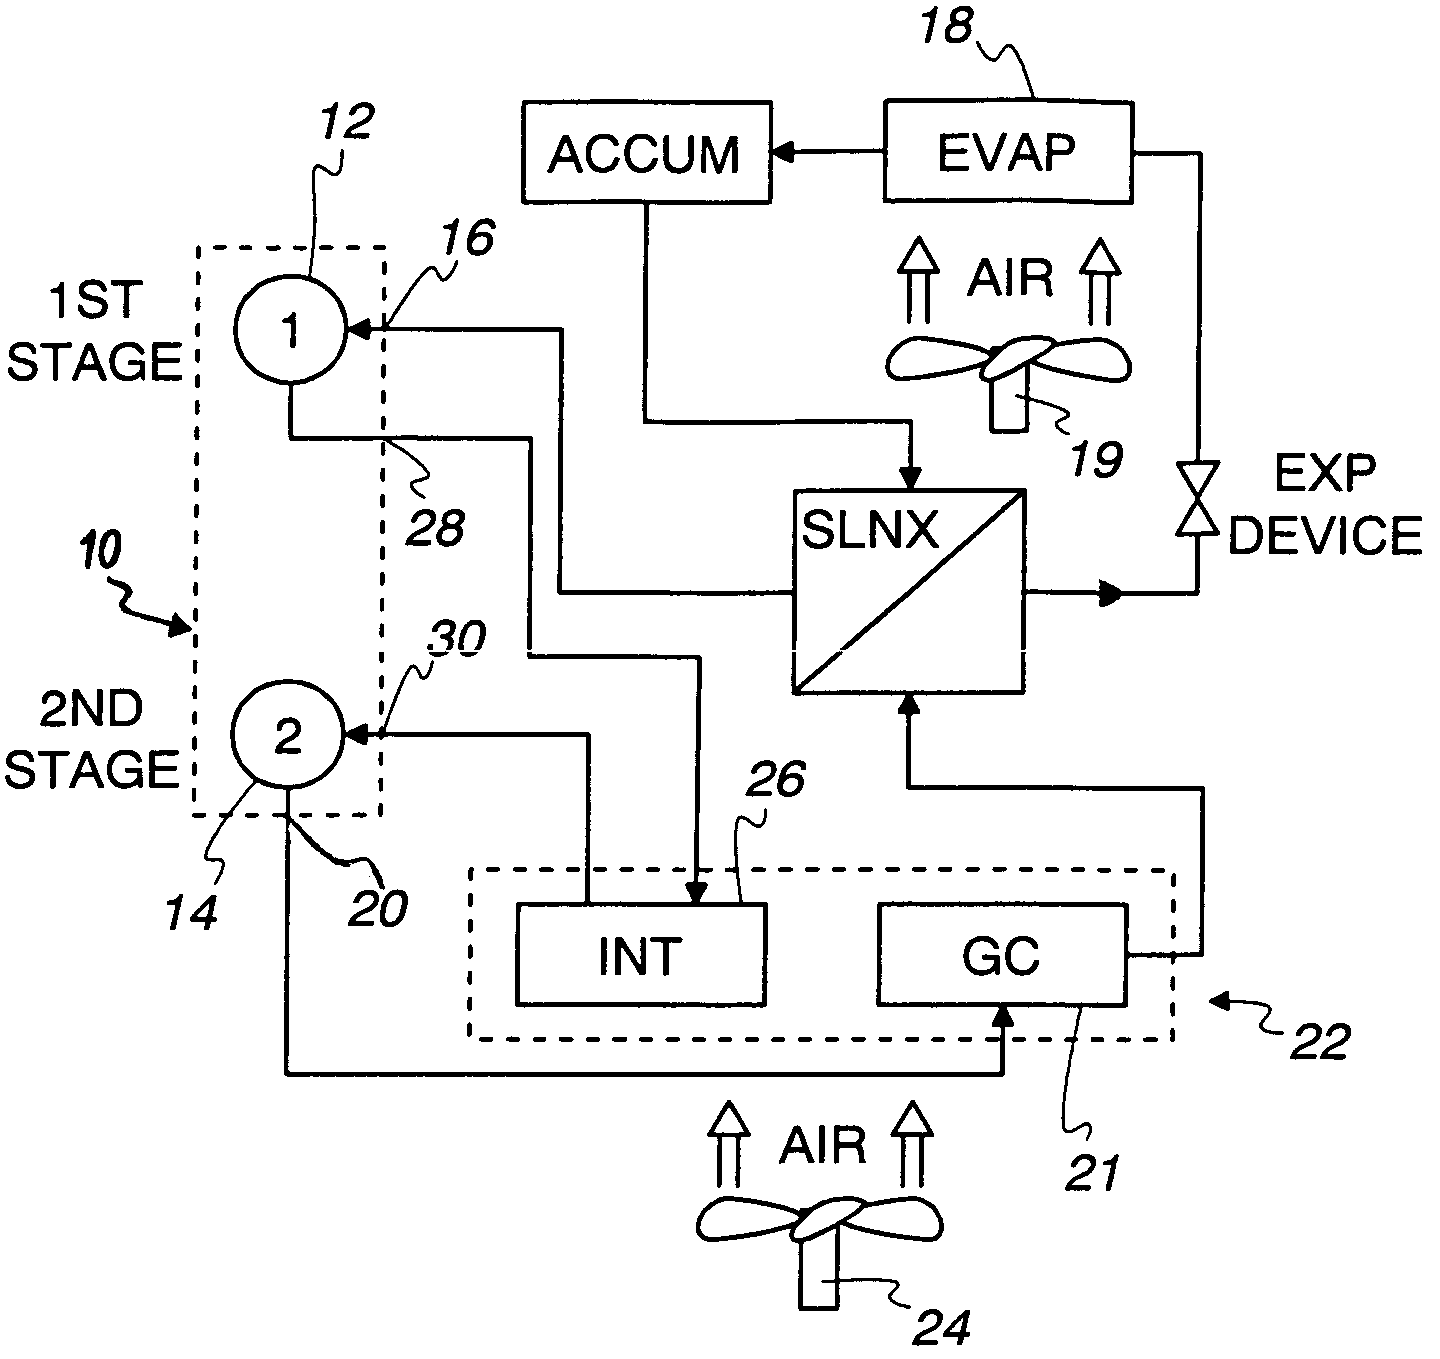 Integrated heat exchanger for use in a refrigeration system